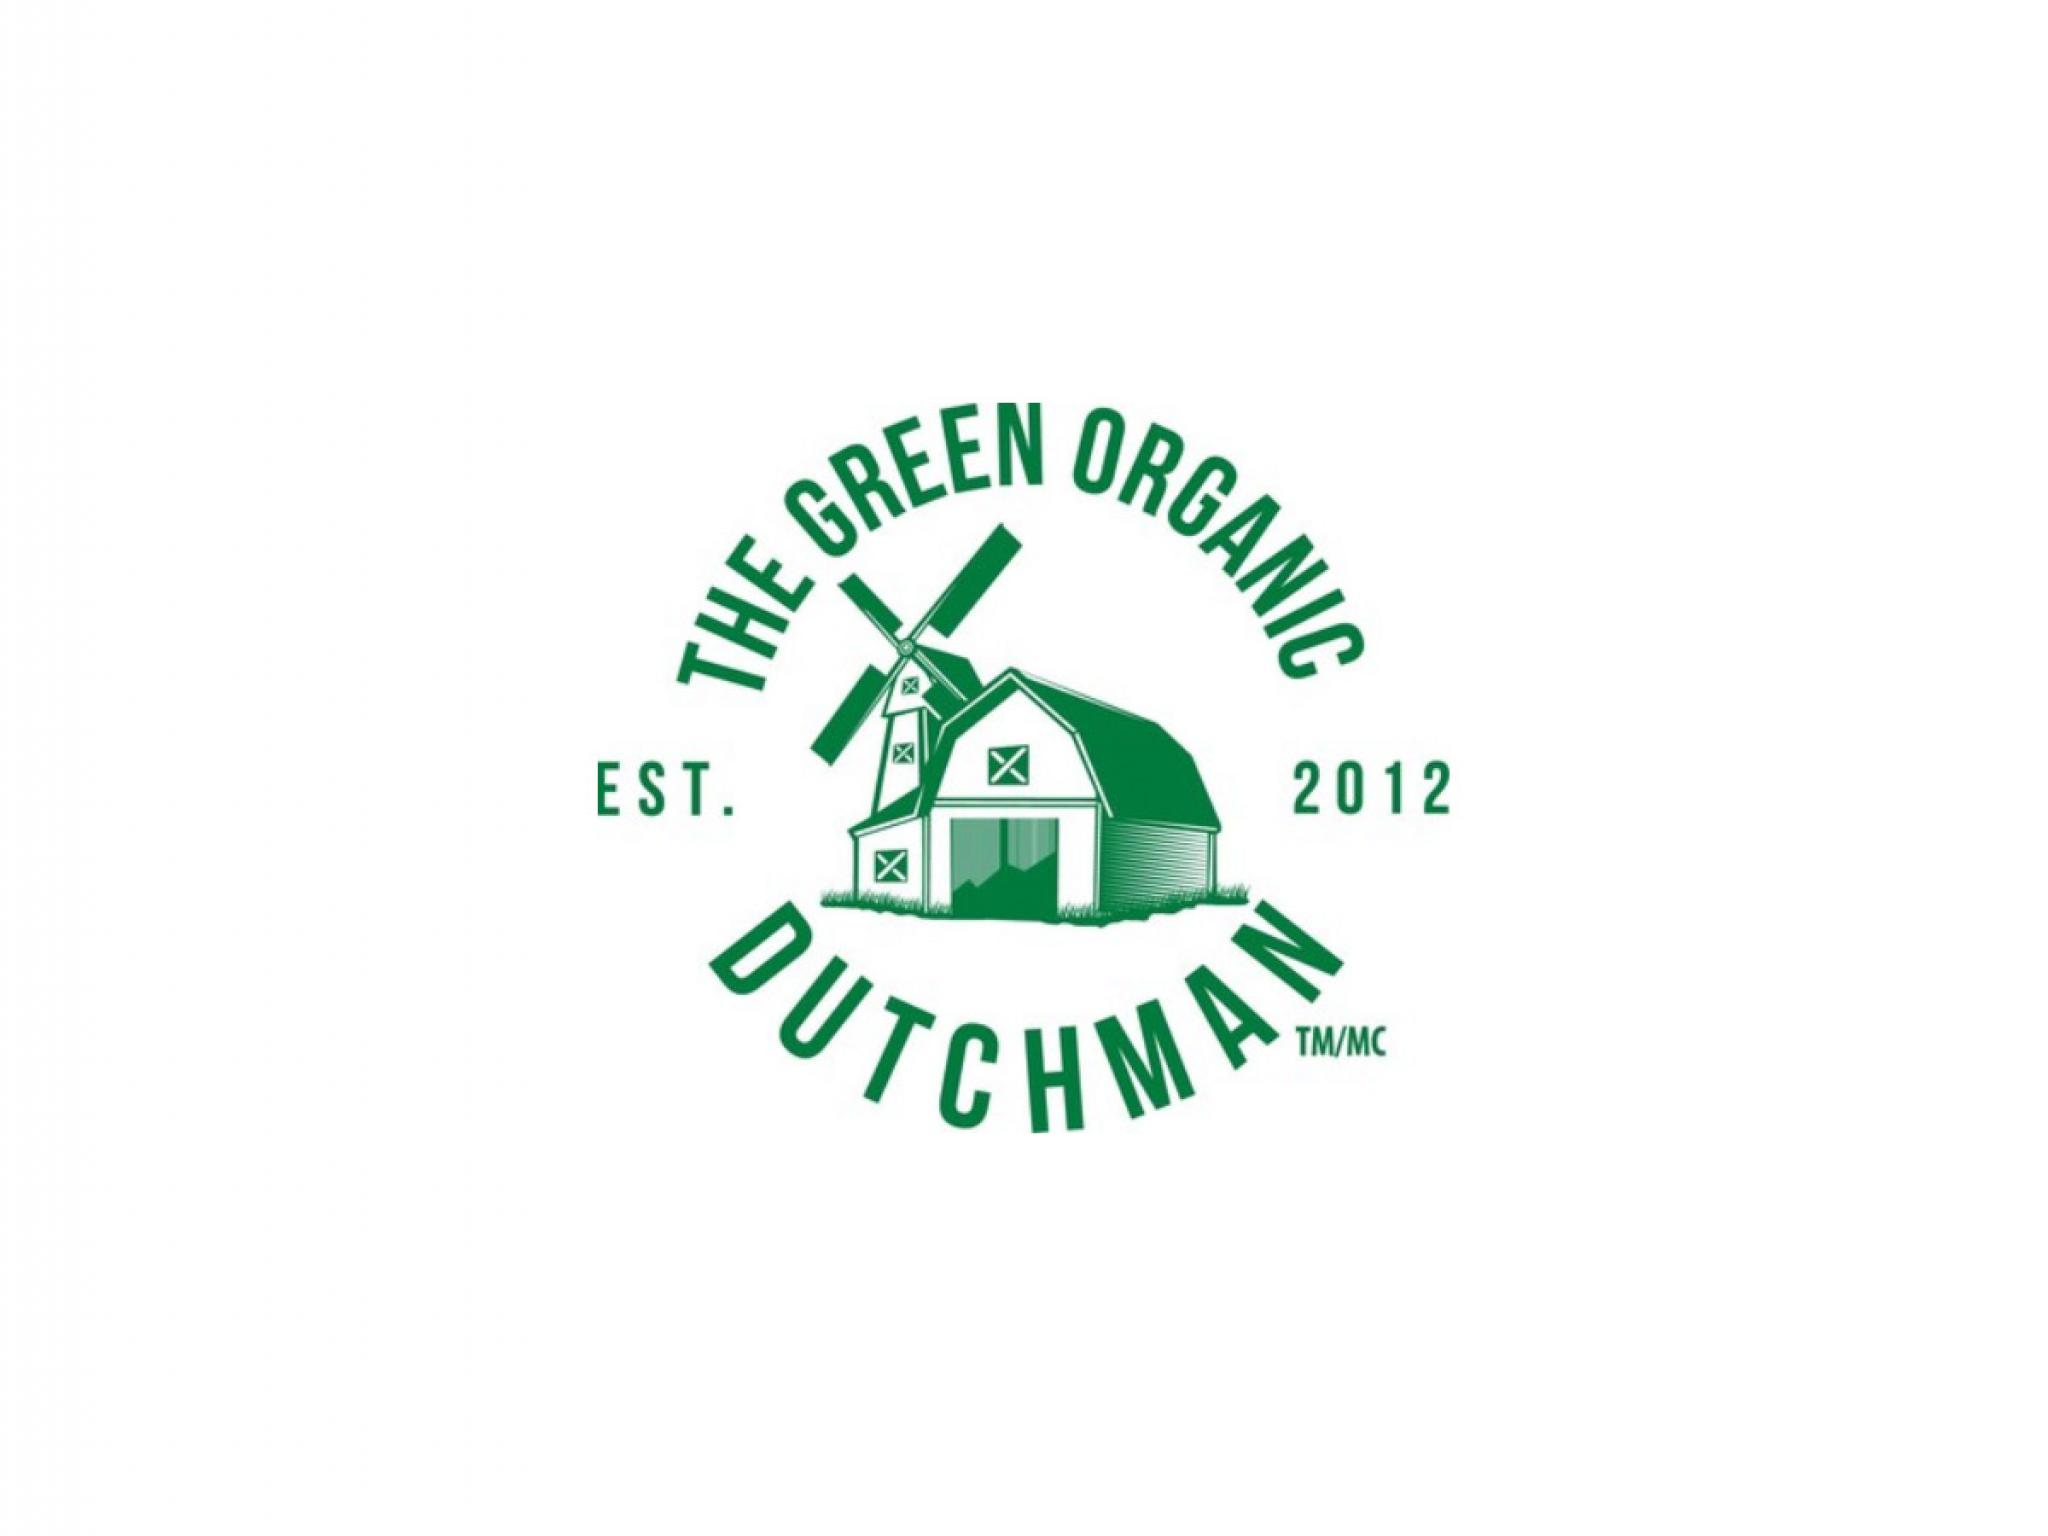  green-organic-dutchman-cannabis-co-expects-117m-in-q2-revenue-welcomes-gayle-duncan-to-its-leadership-team 